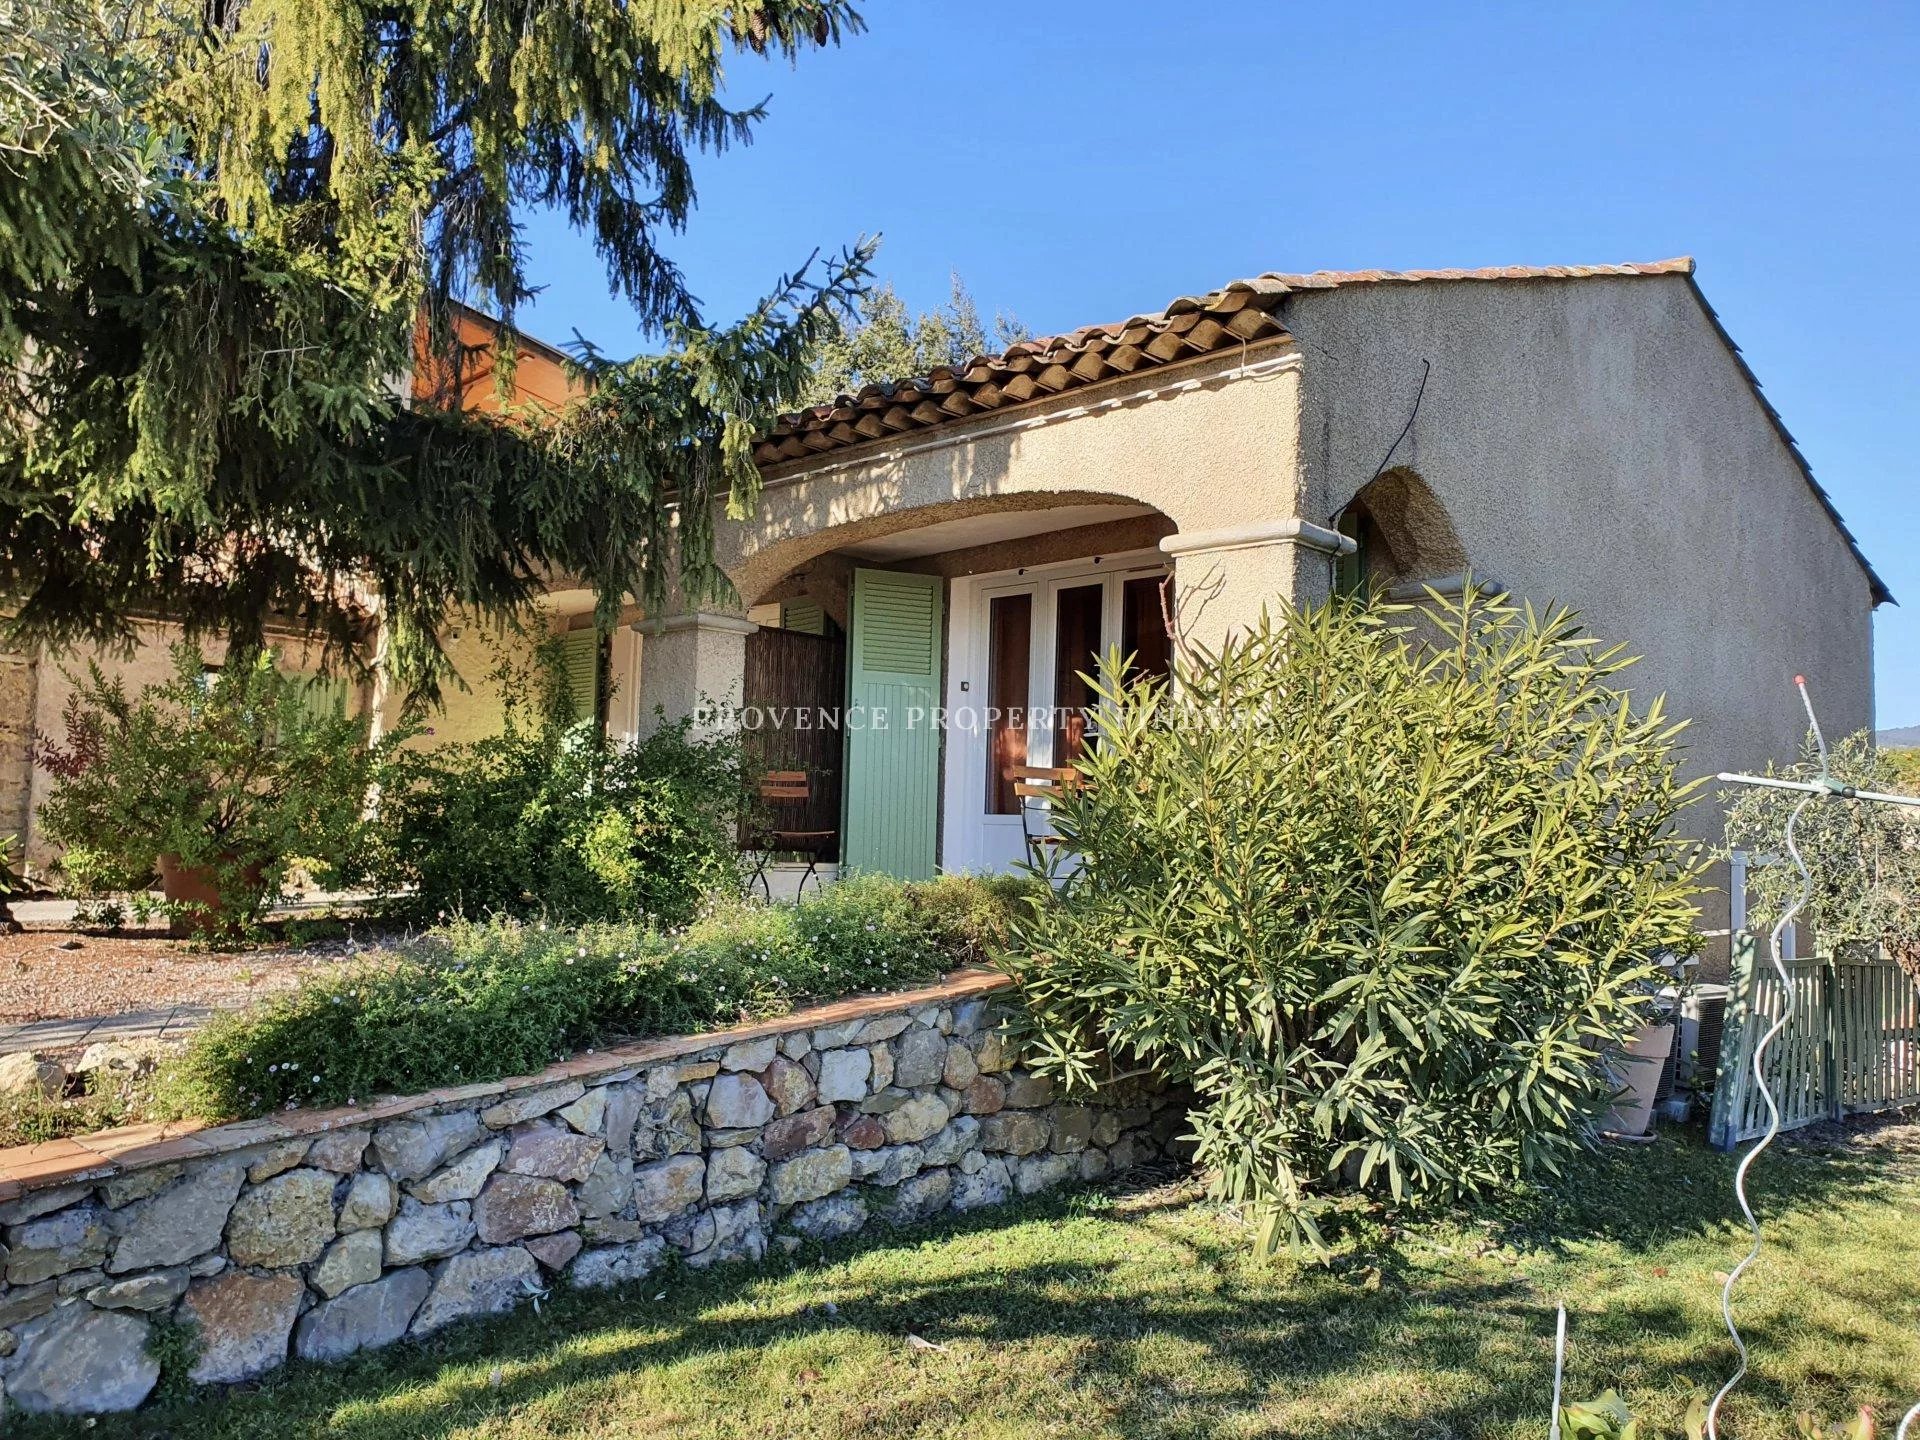 Bastide for sale in Flayosc, lots of potential. Walking distance to the village.